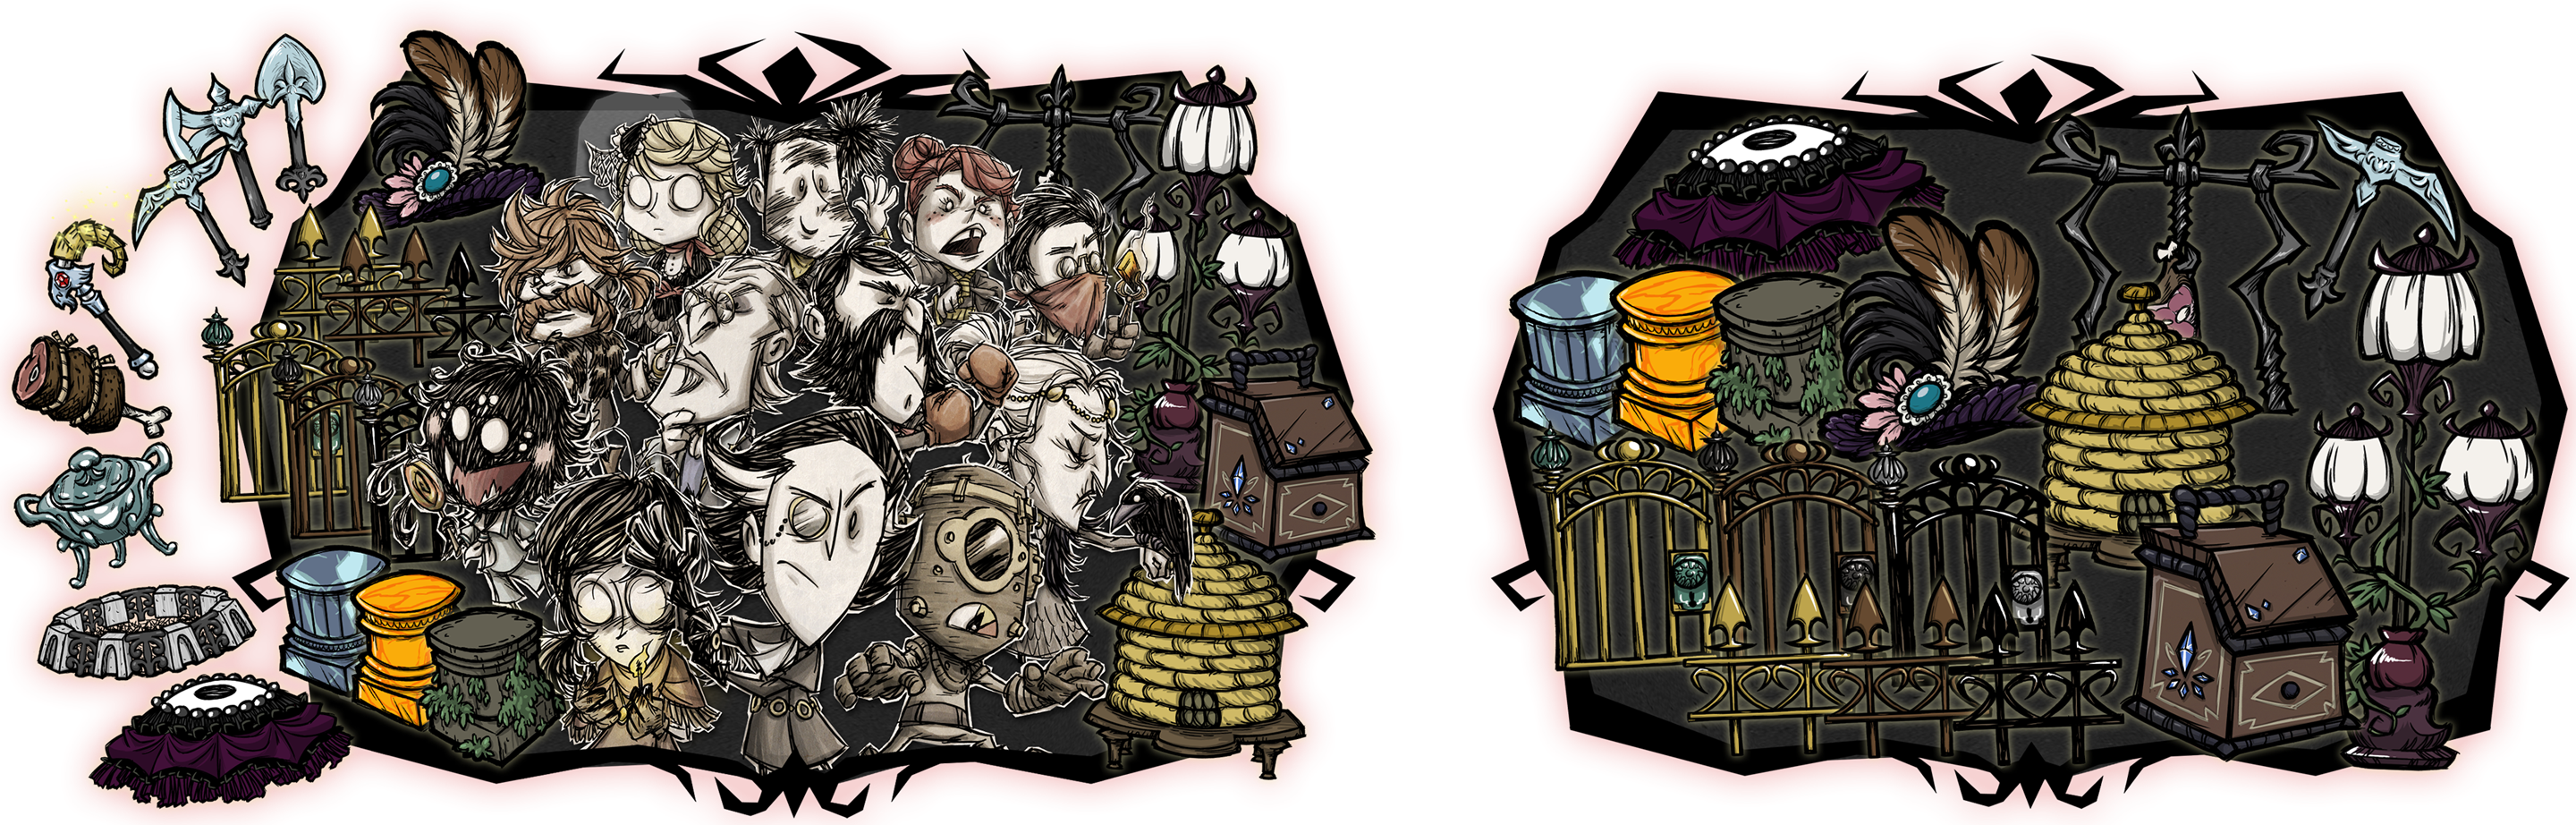 Don starve together steam items фото 39